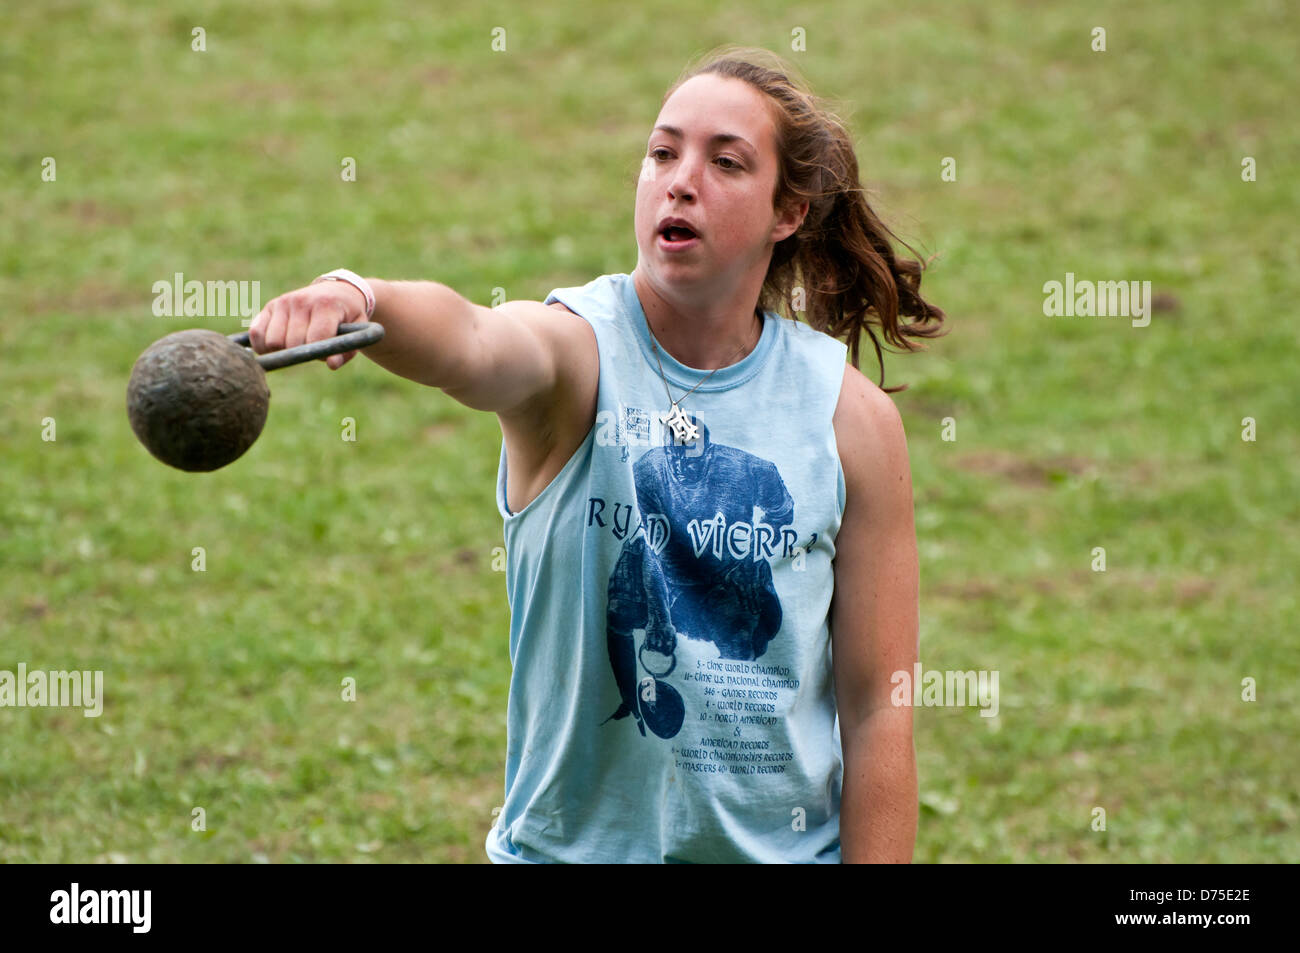 Woman weight throw event in Scottish Highland games Stock Photo